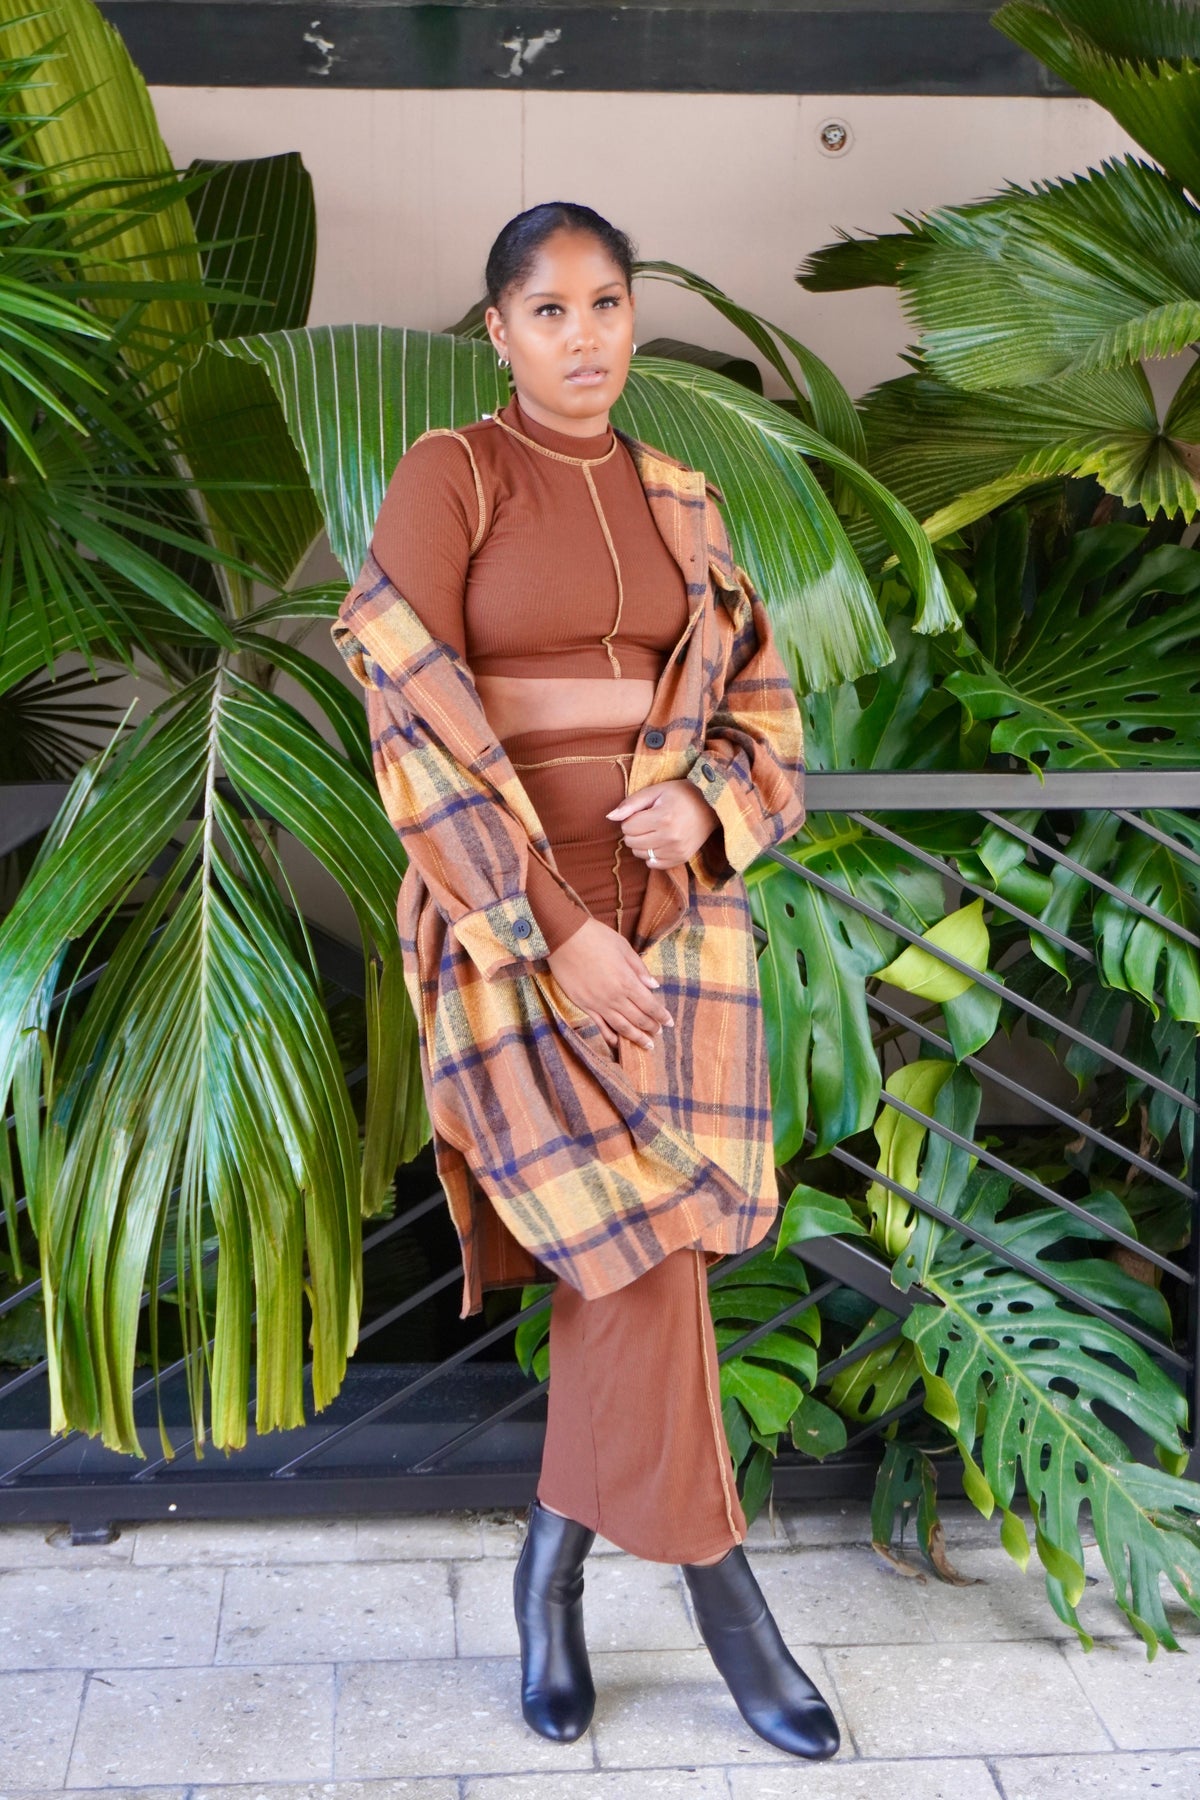 Get trendy with Brown Maxi Skirt Set - Sets available at ELLE TENAJ. Grab yours for $52 today!